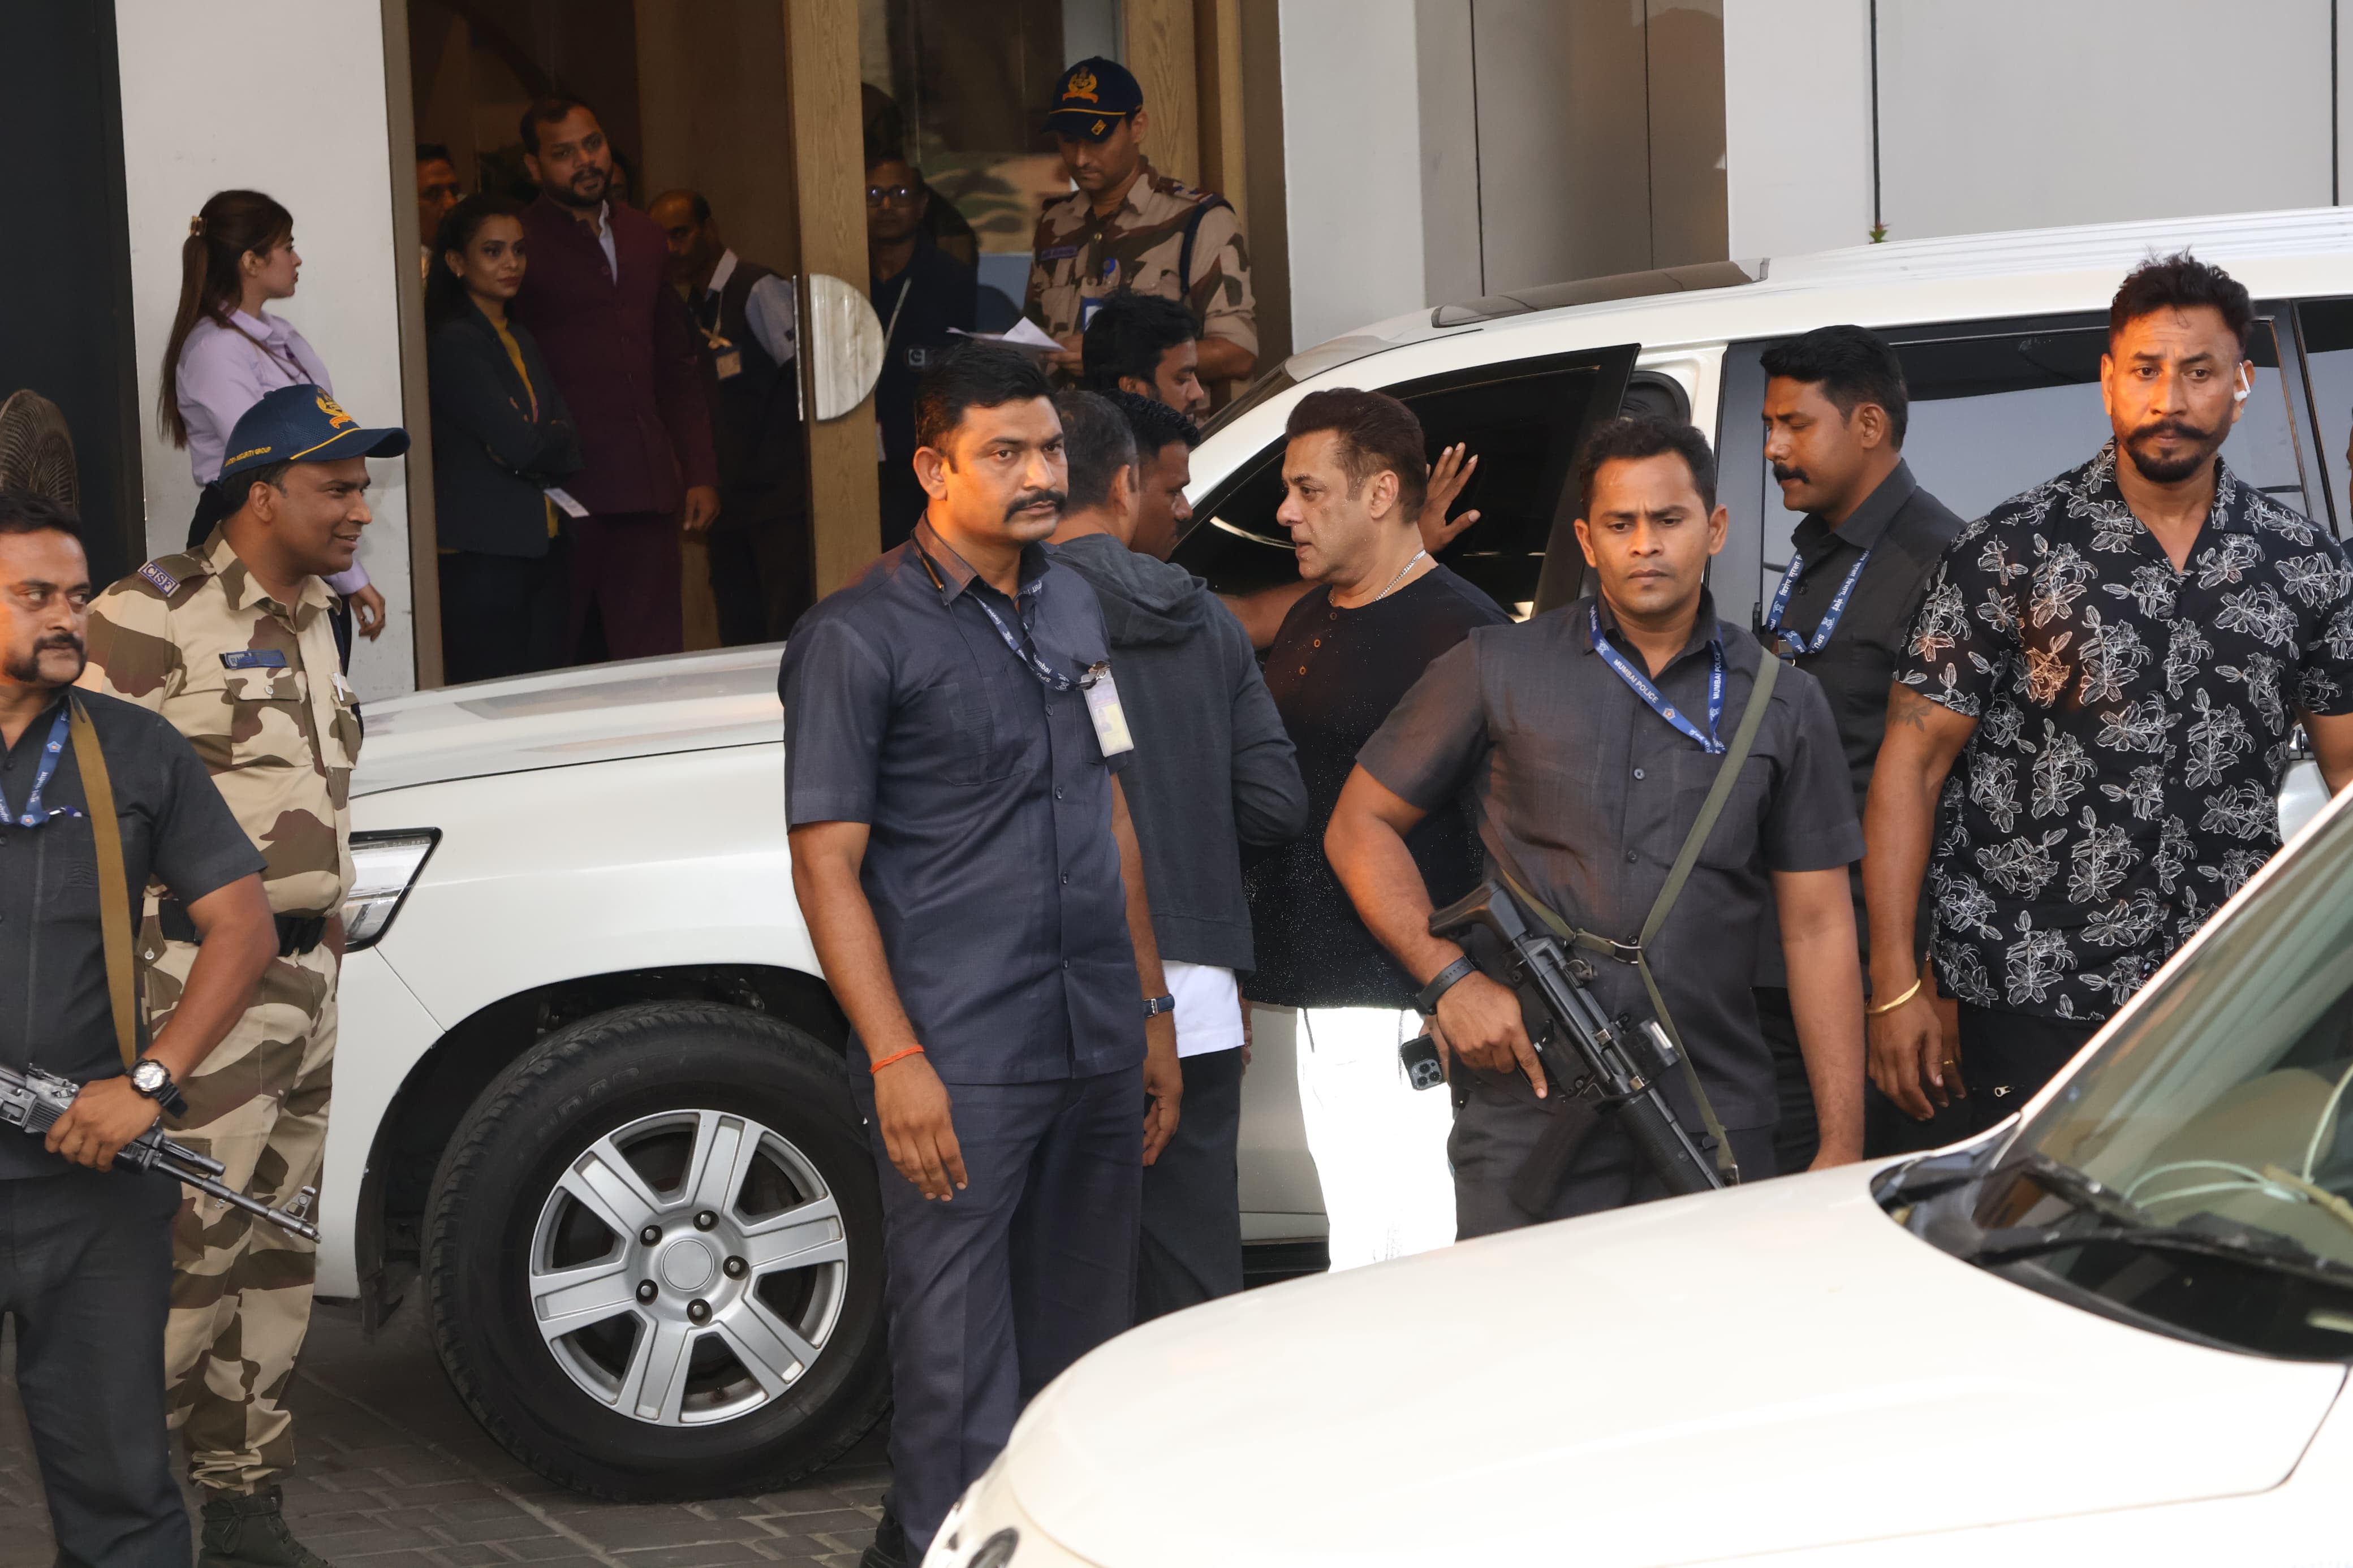 Look at the security surrounding the Bollywood superstar!